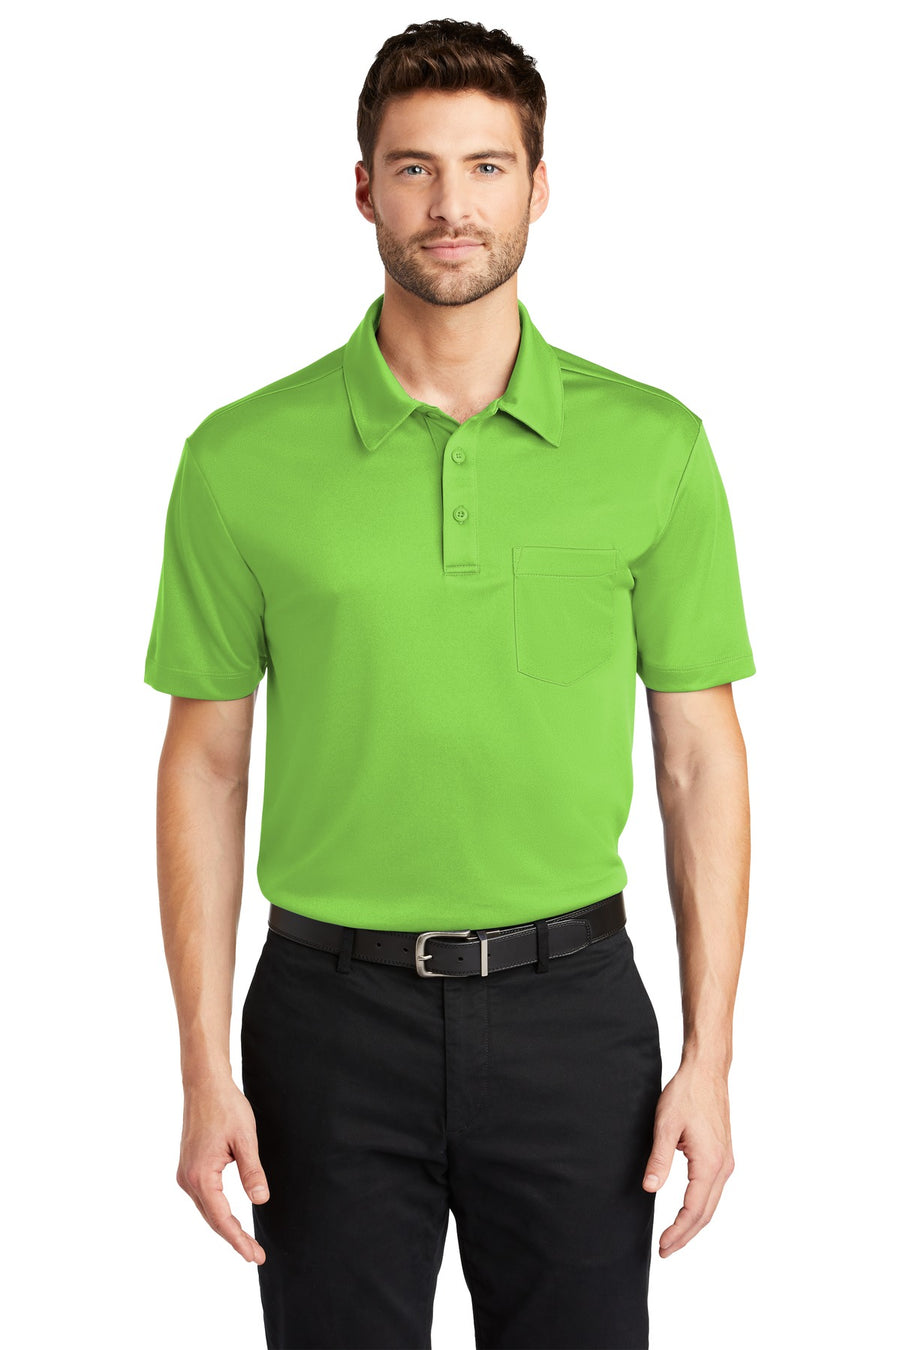 Port Authority Silk Touch Performance Pocket Polo.